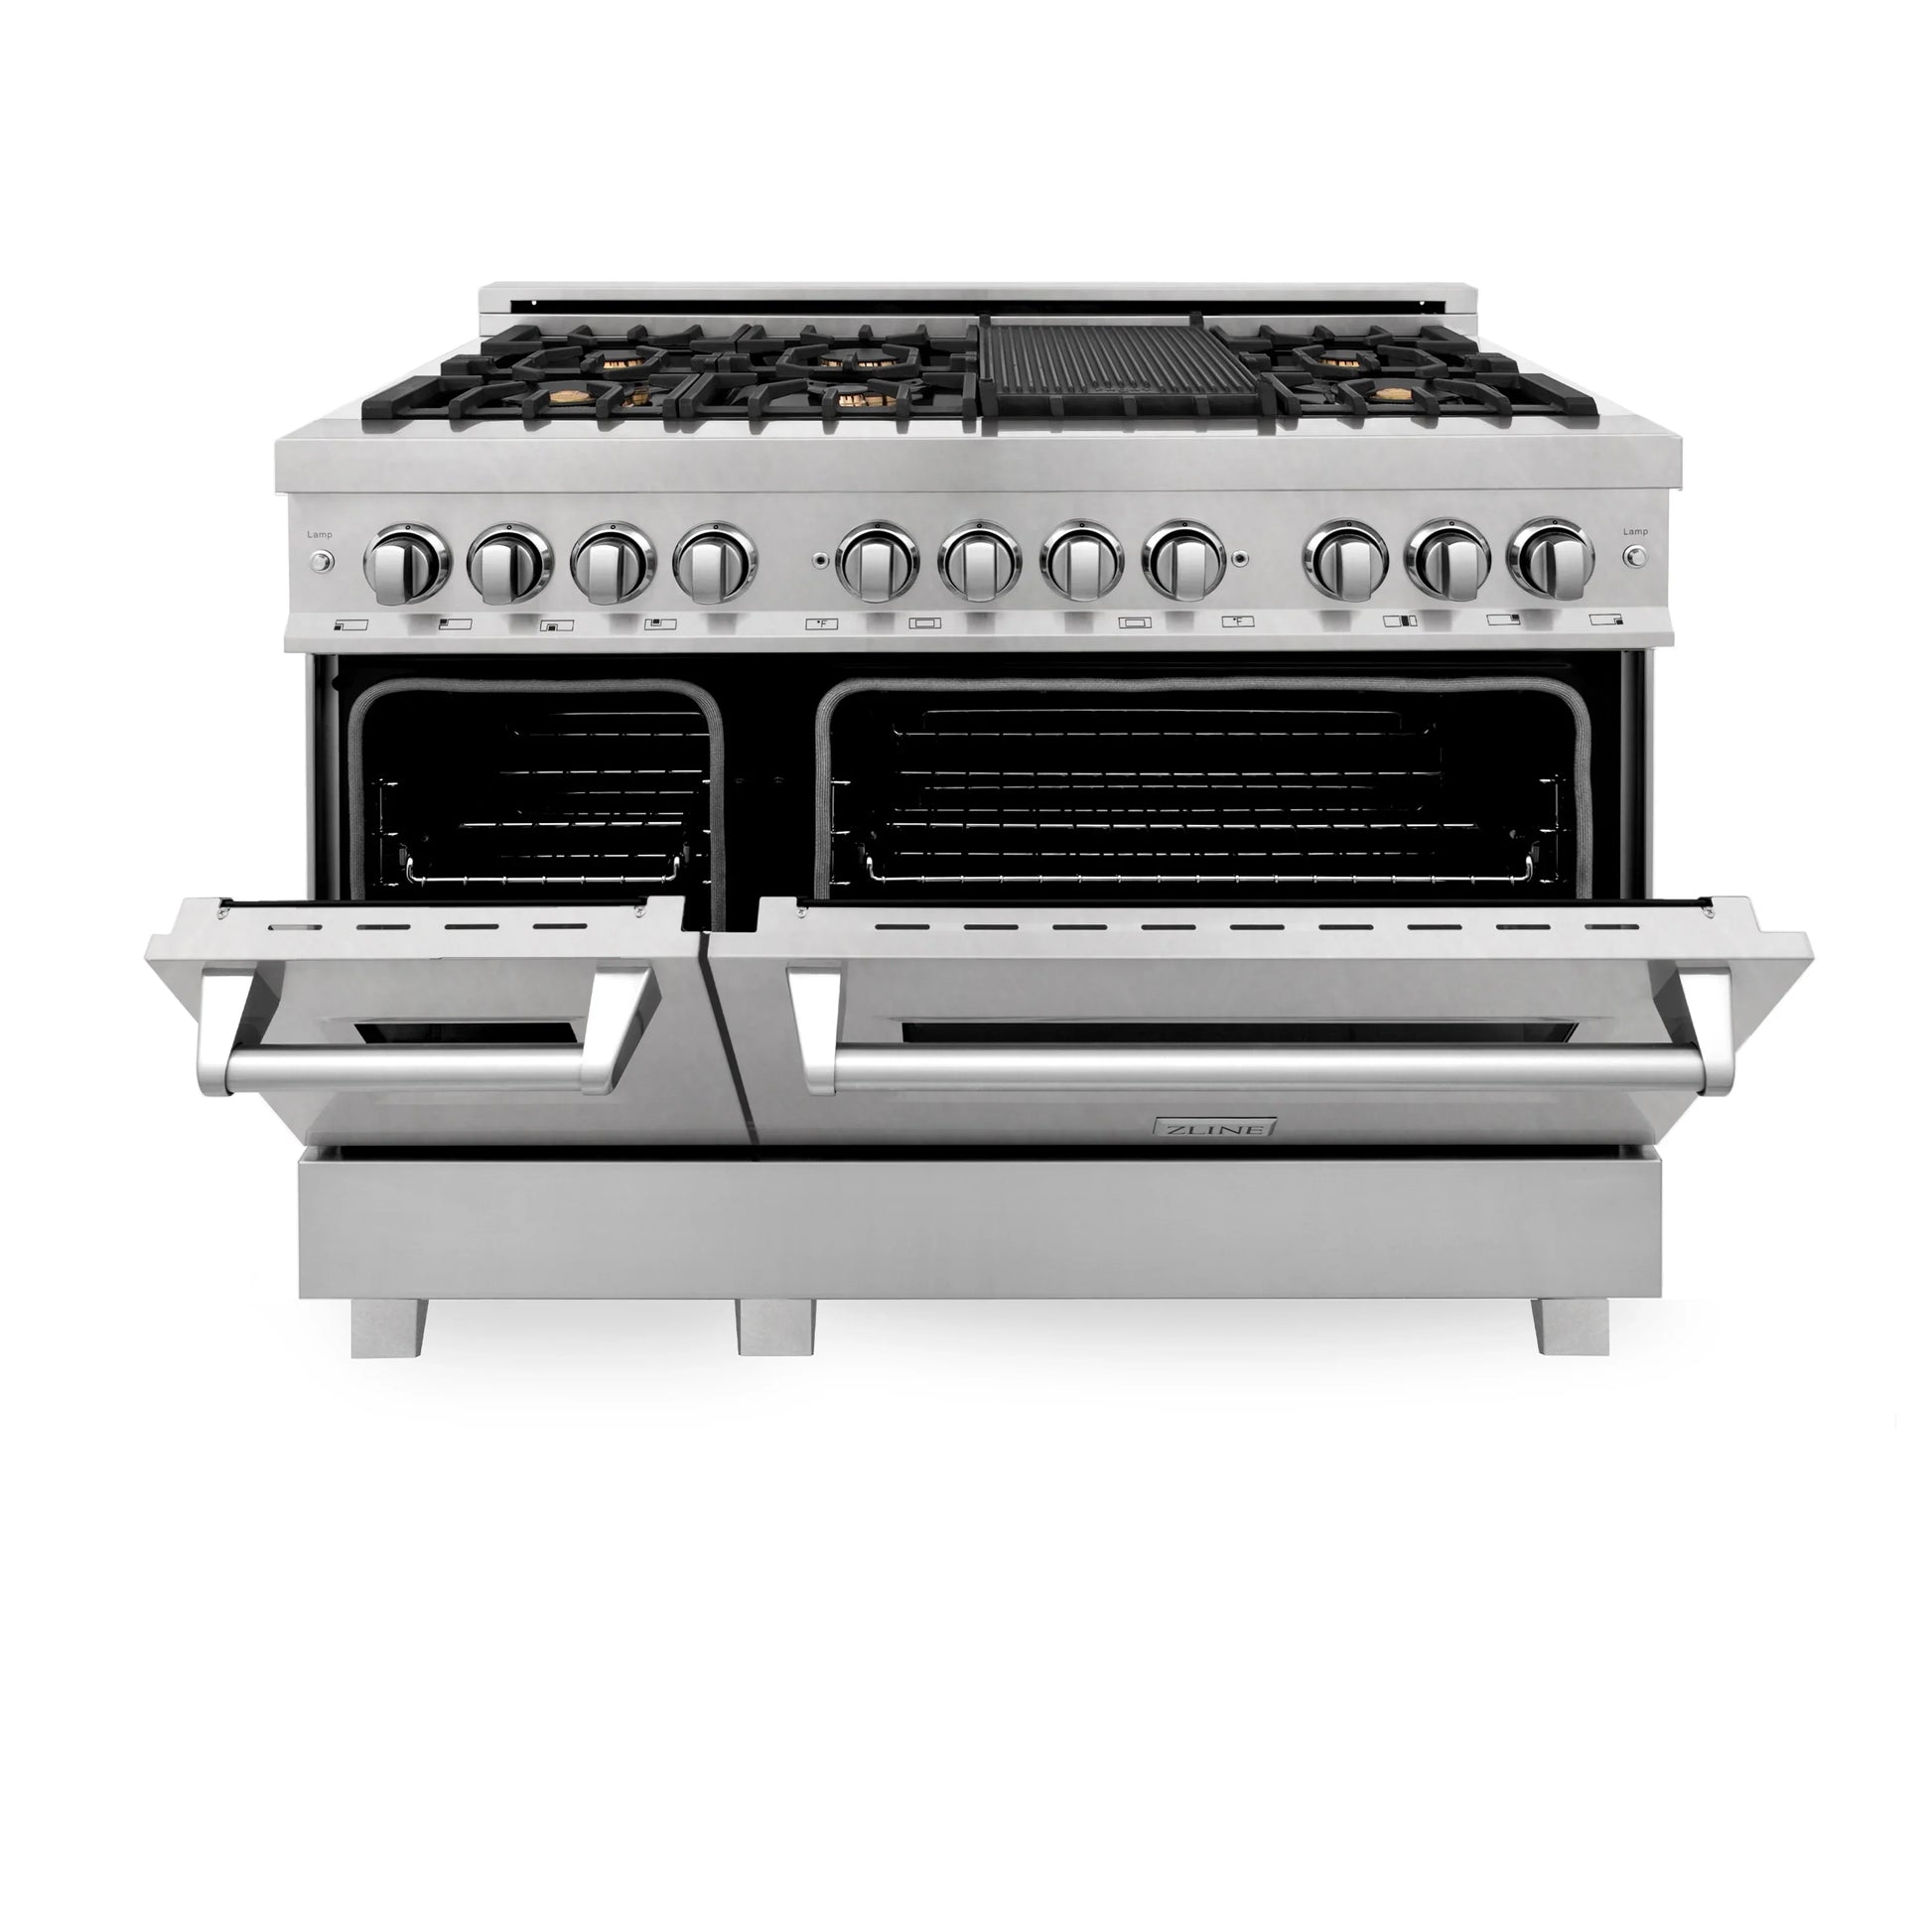 ZLINE 48" Dual Fuel Range - Gas Stove and Electric Oven, Fingerprint Resistant with Brass Burners